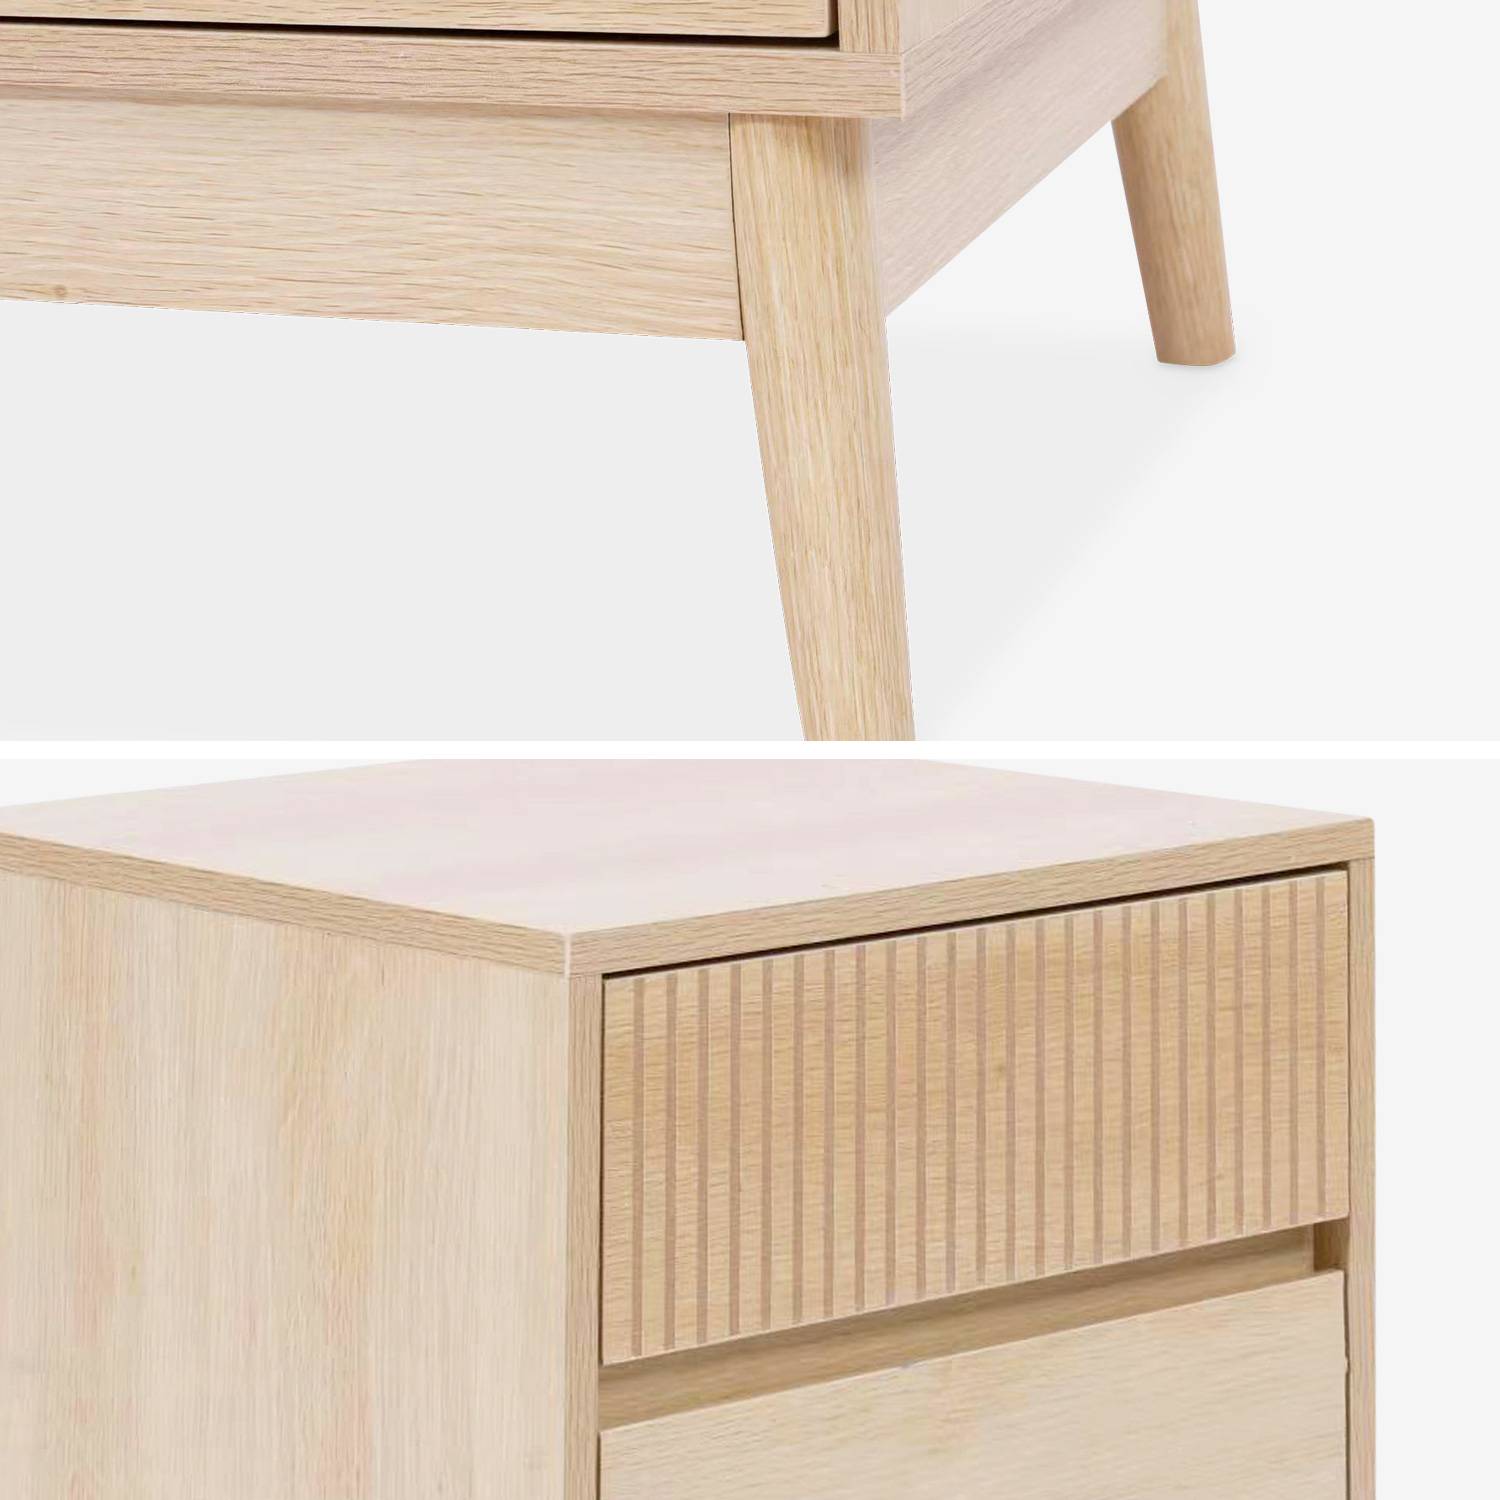 Grooved wooden bedside table with 2 drawers, 40x39x48cm, Linear - Natural Wood colour Photo5